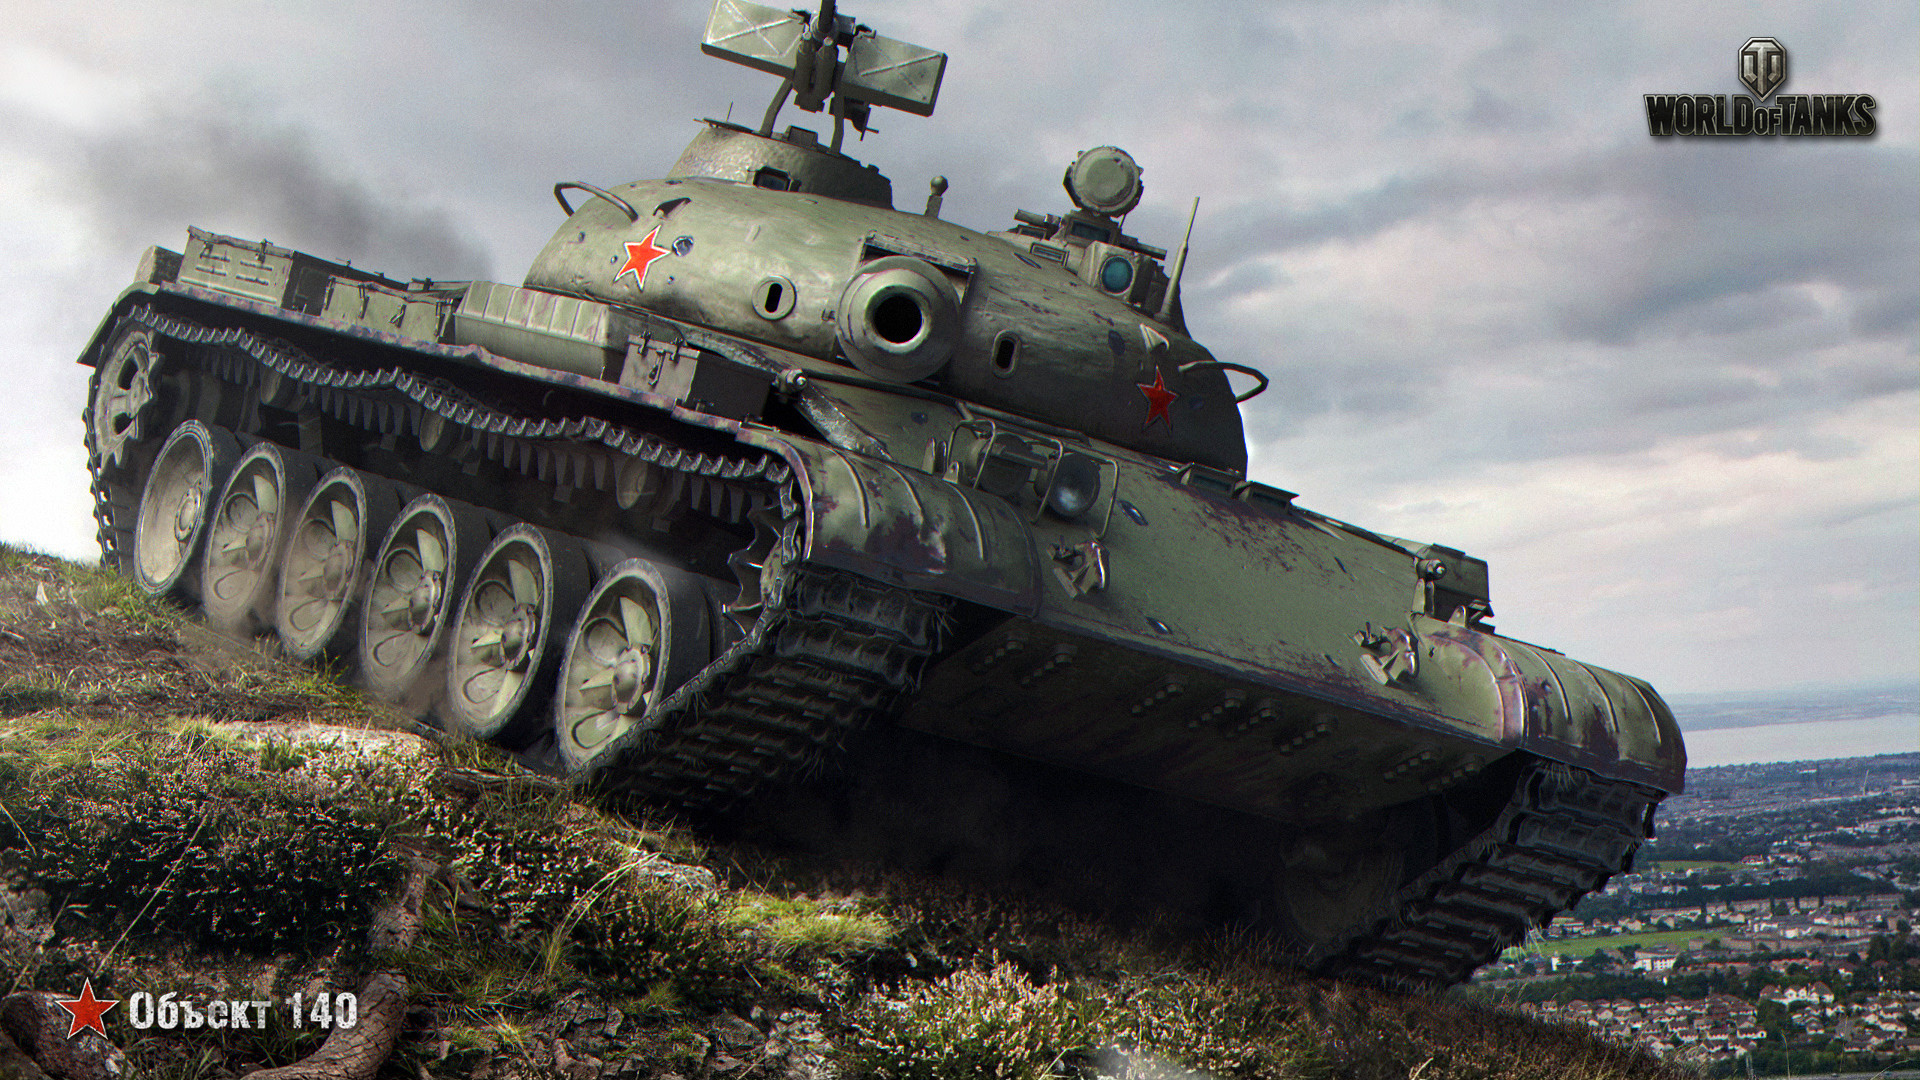 1920x1080 Image WOT Tanks Object 140 Games  World of Tanks